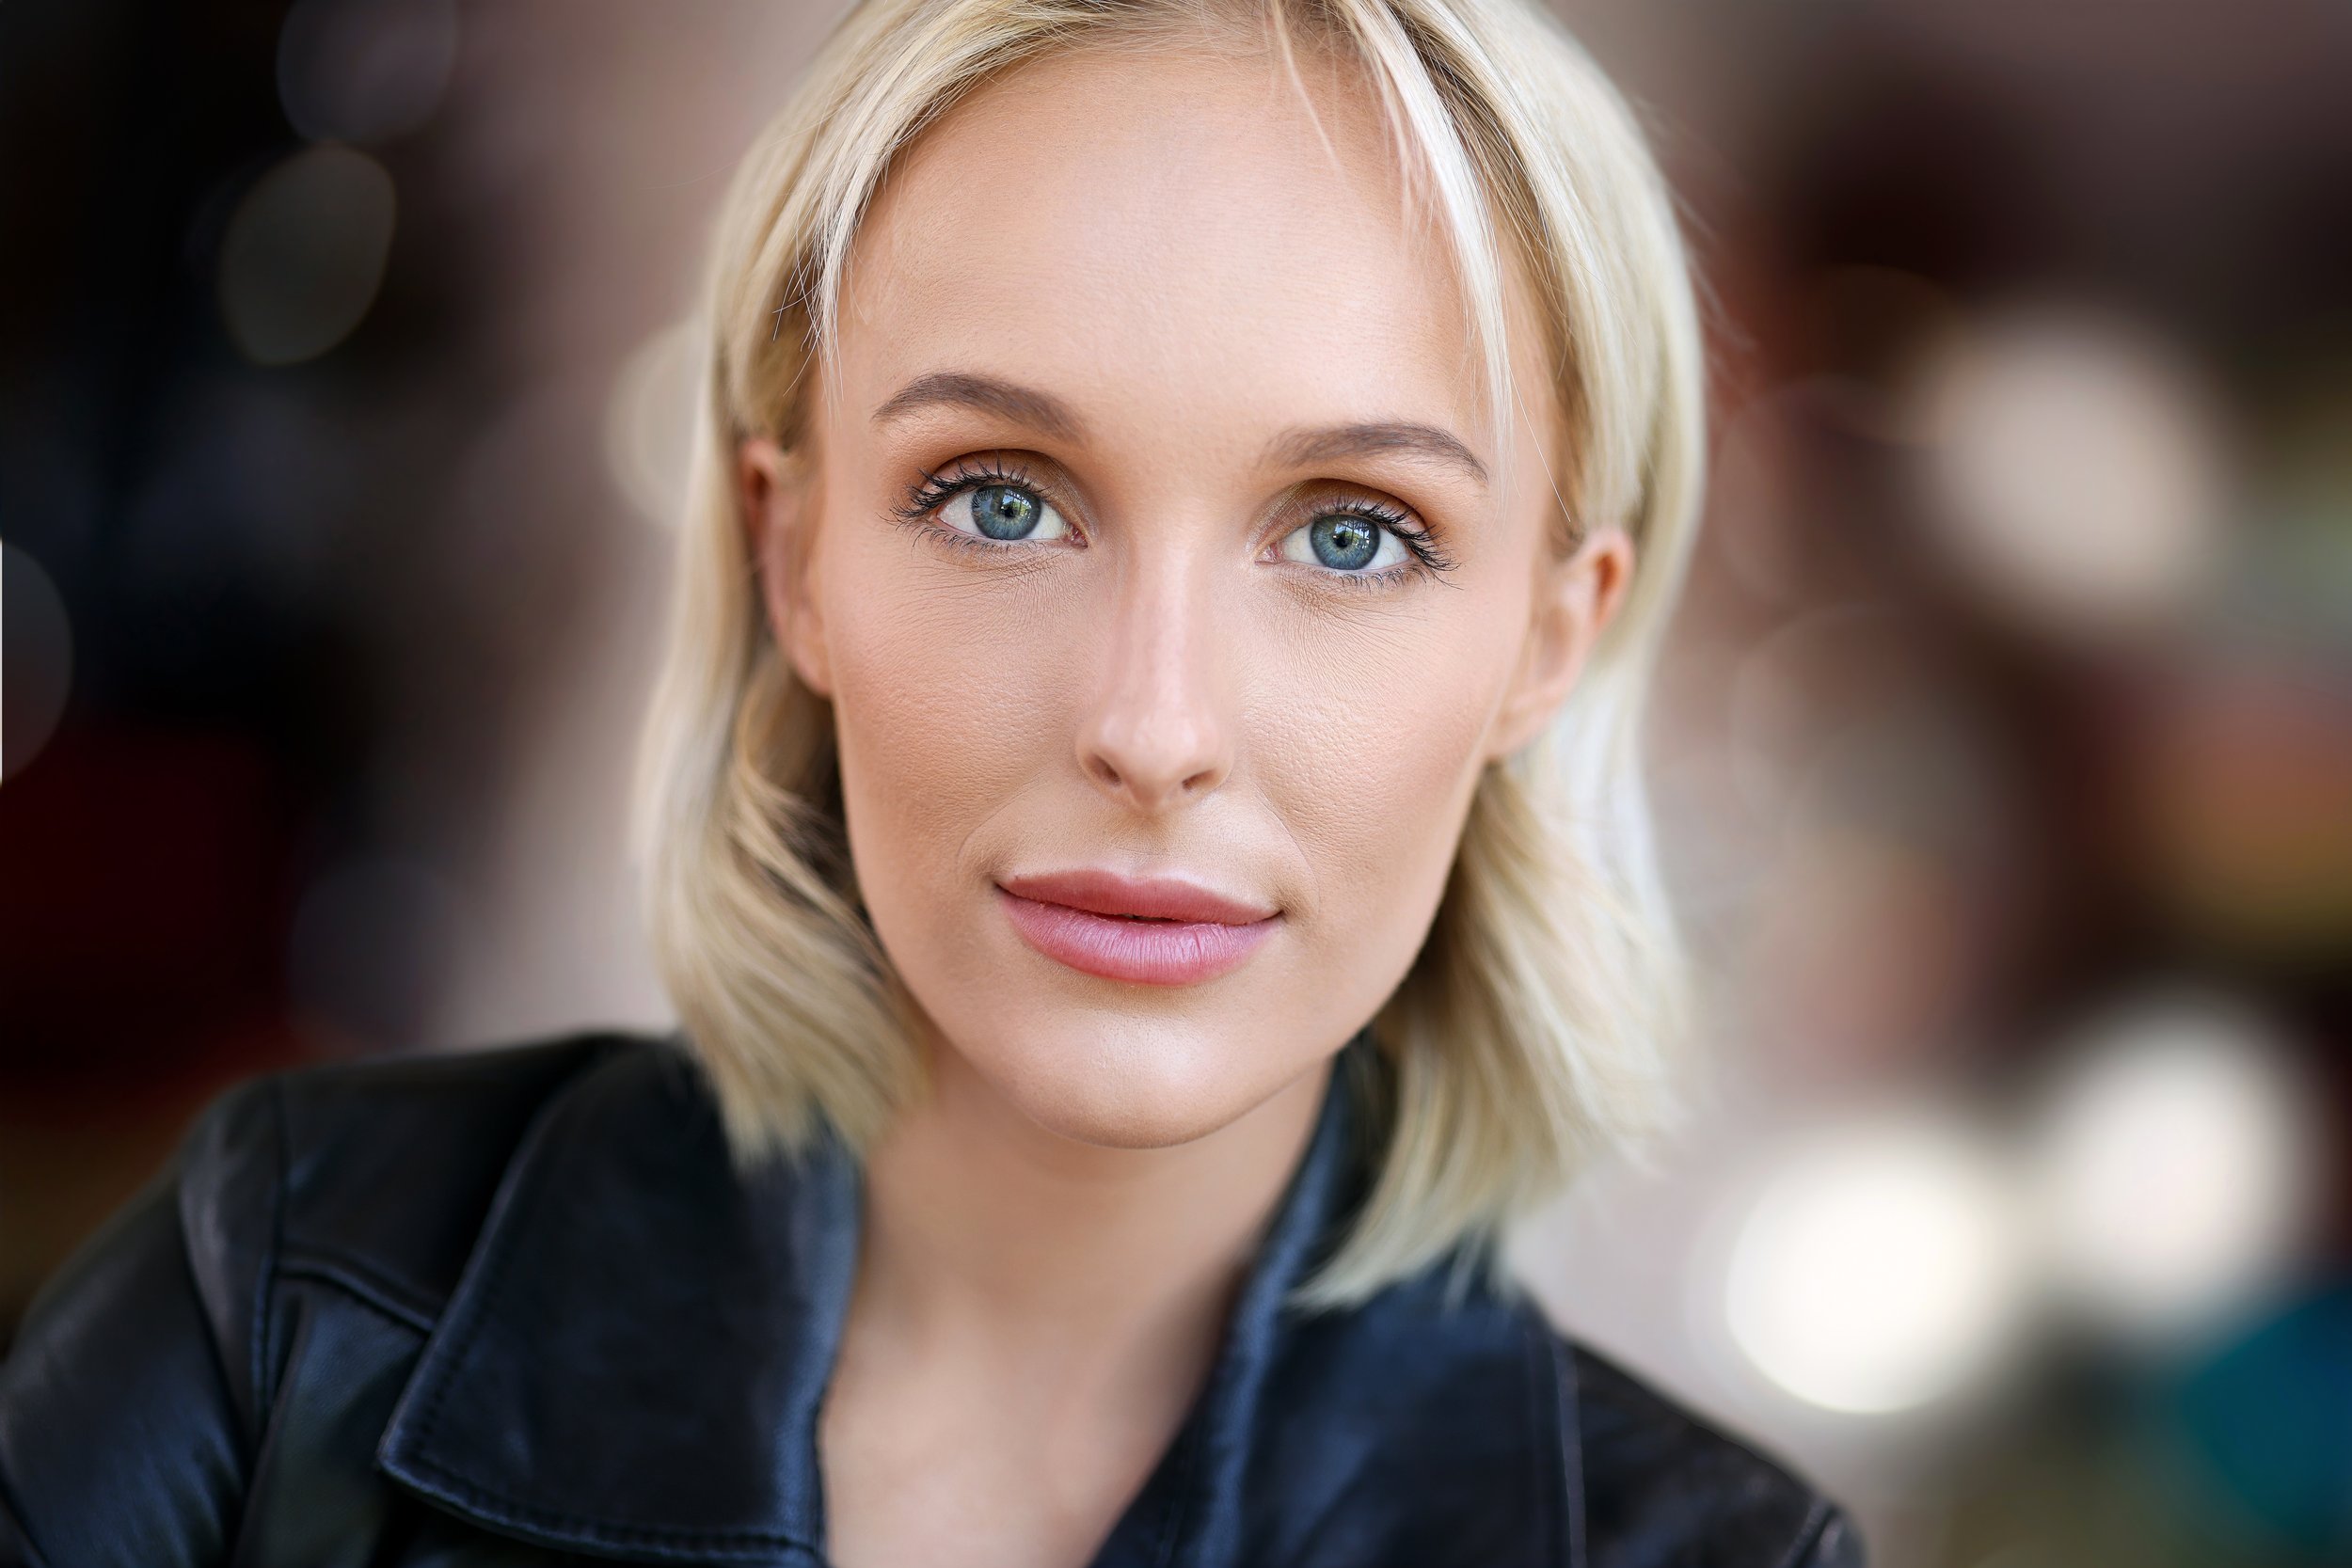 Actress Headshot by Kenneth dolin